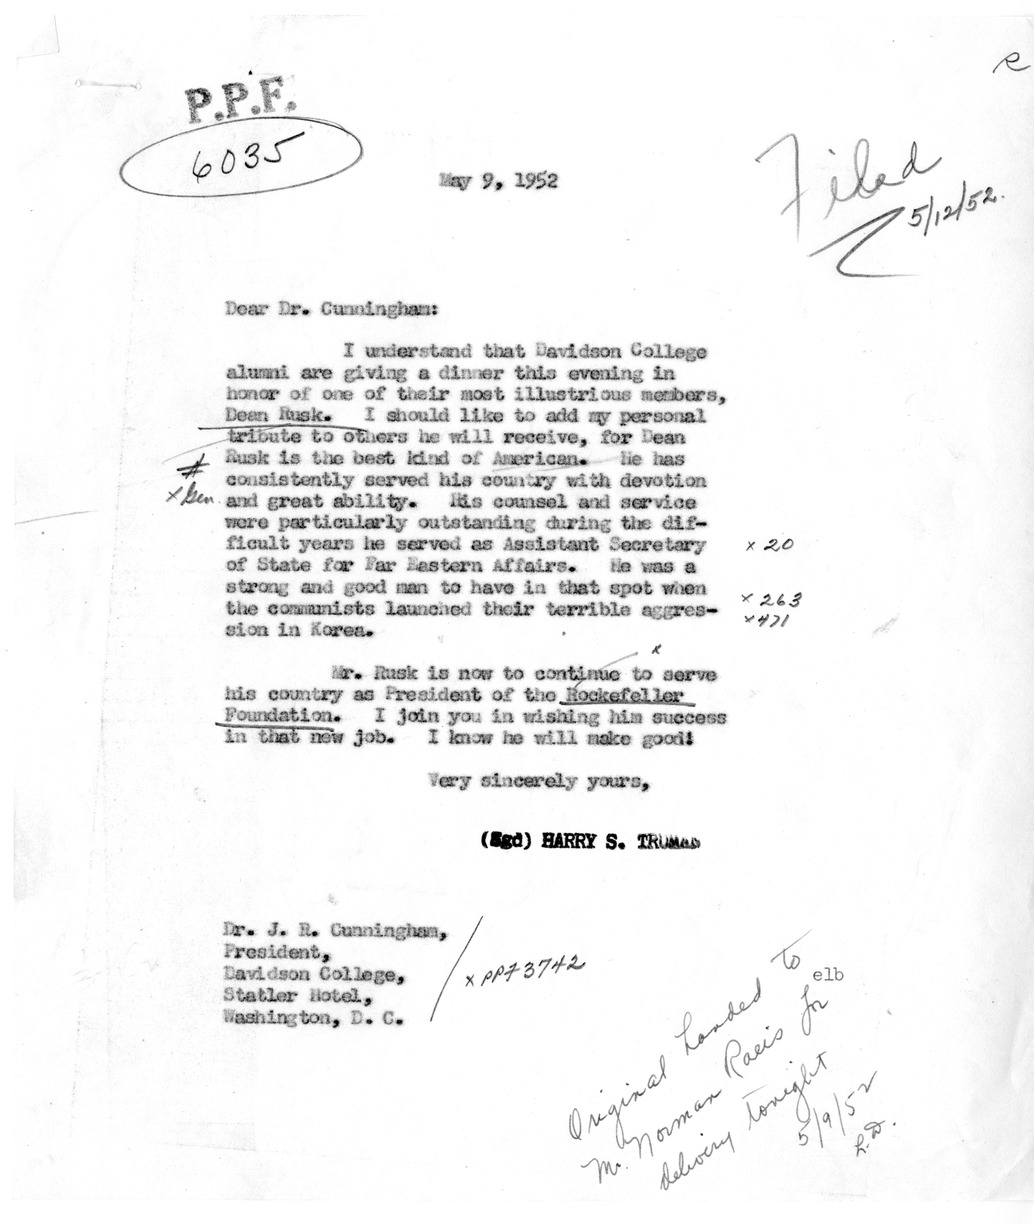 Letter from President Harry S. Truman to Dr. J. R. Cunningham, with Related Material